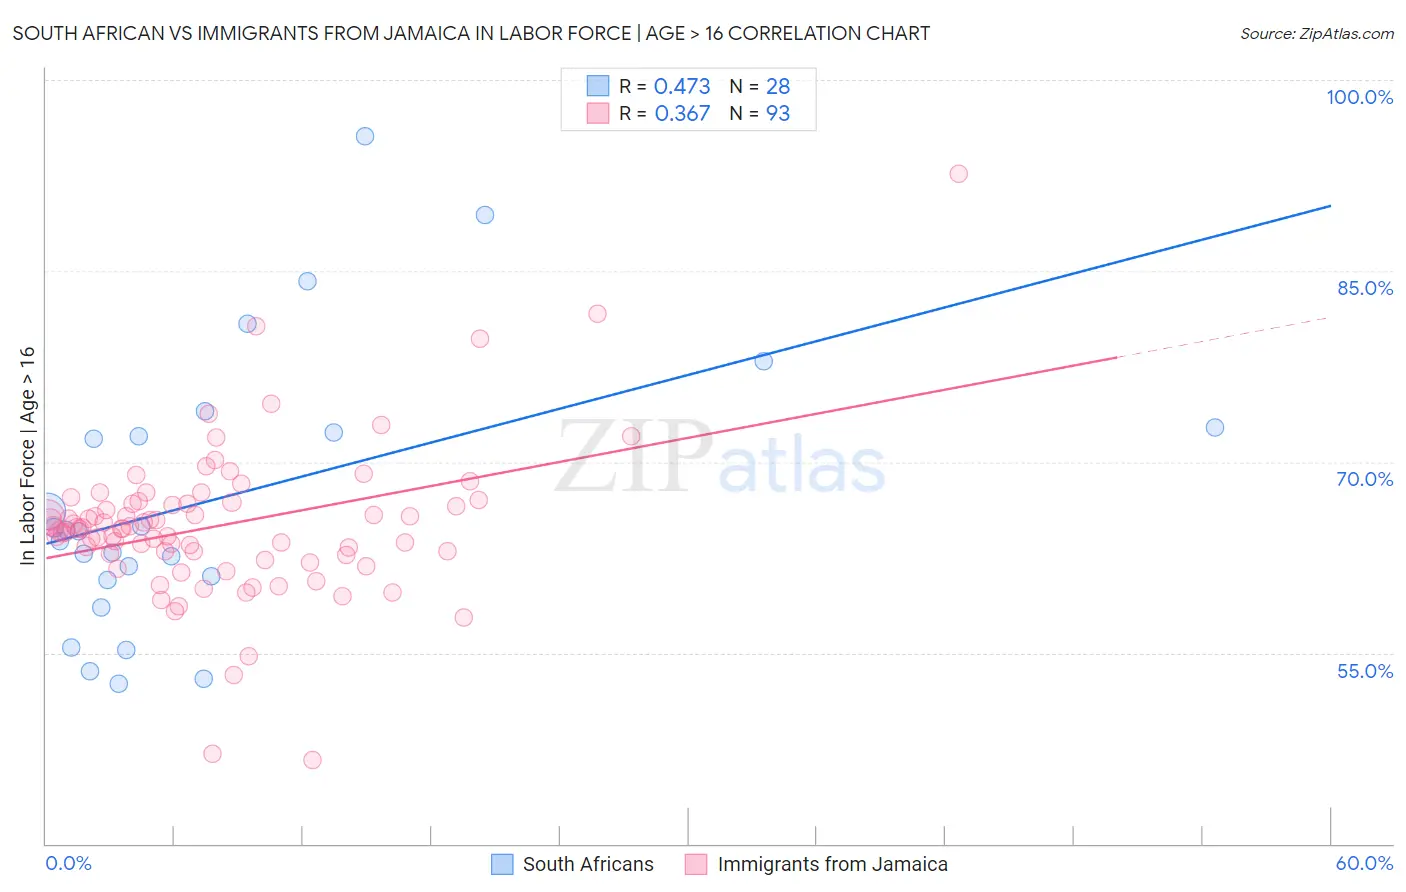 South African vs Immigrants from Jamaica In Labor Force | Age > 16